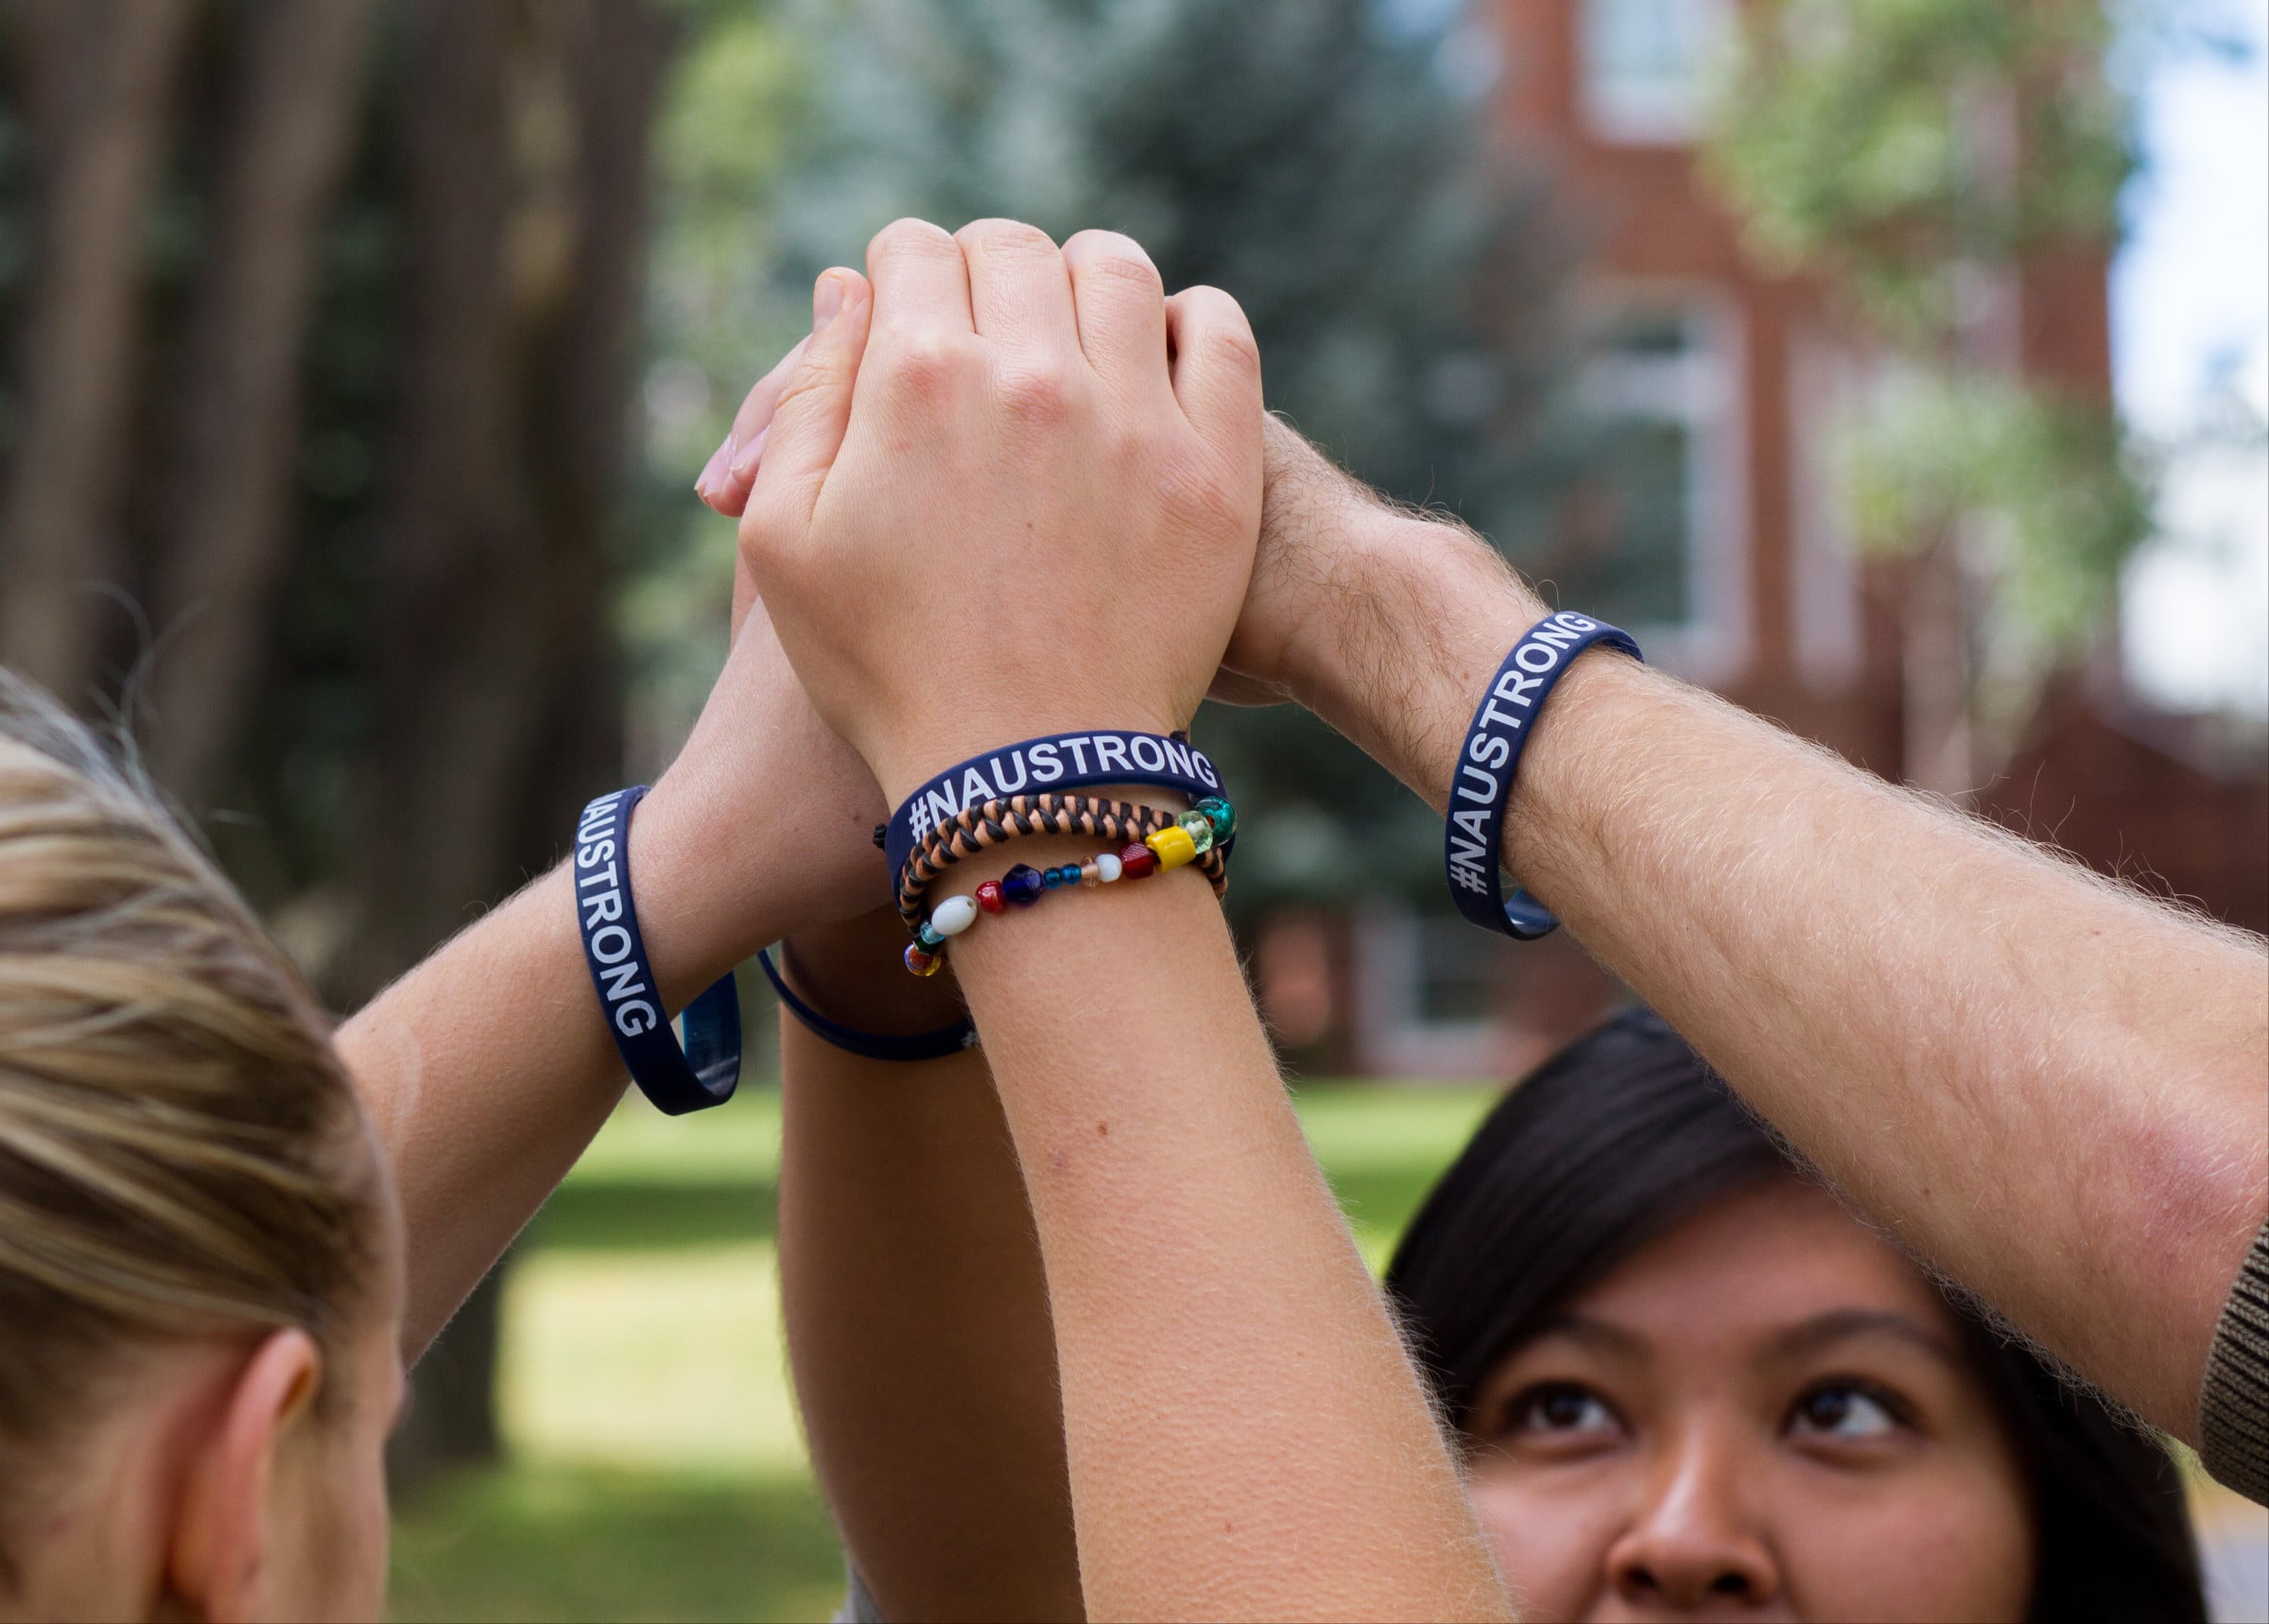 Students with NAU strong bracelets putting their hands together.